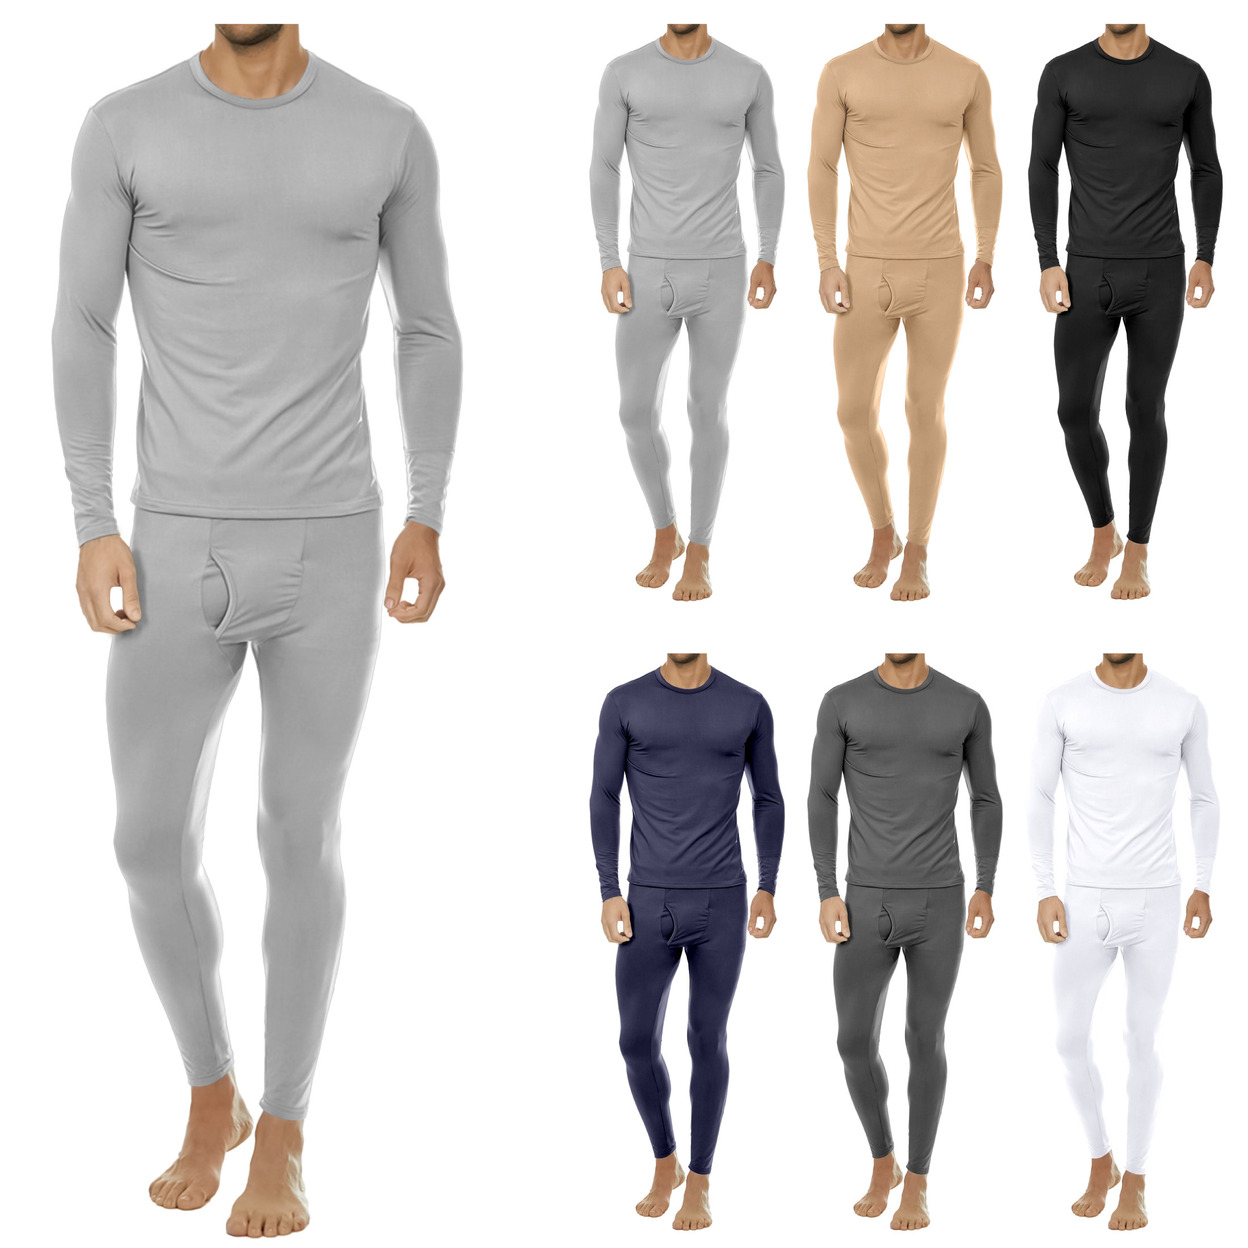 2-Sets: Men's Winter Warm Fleece Lined Thermal Underwear Set For Cold Weather - White&white, Large